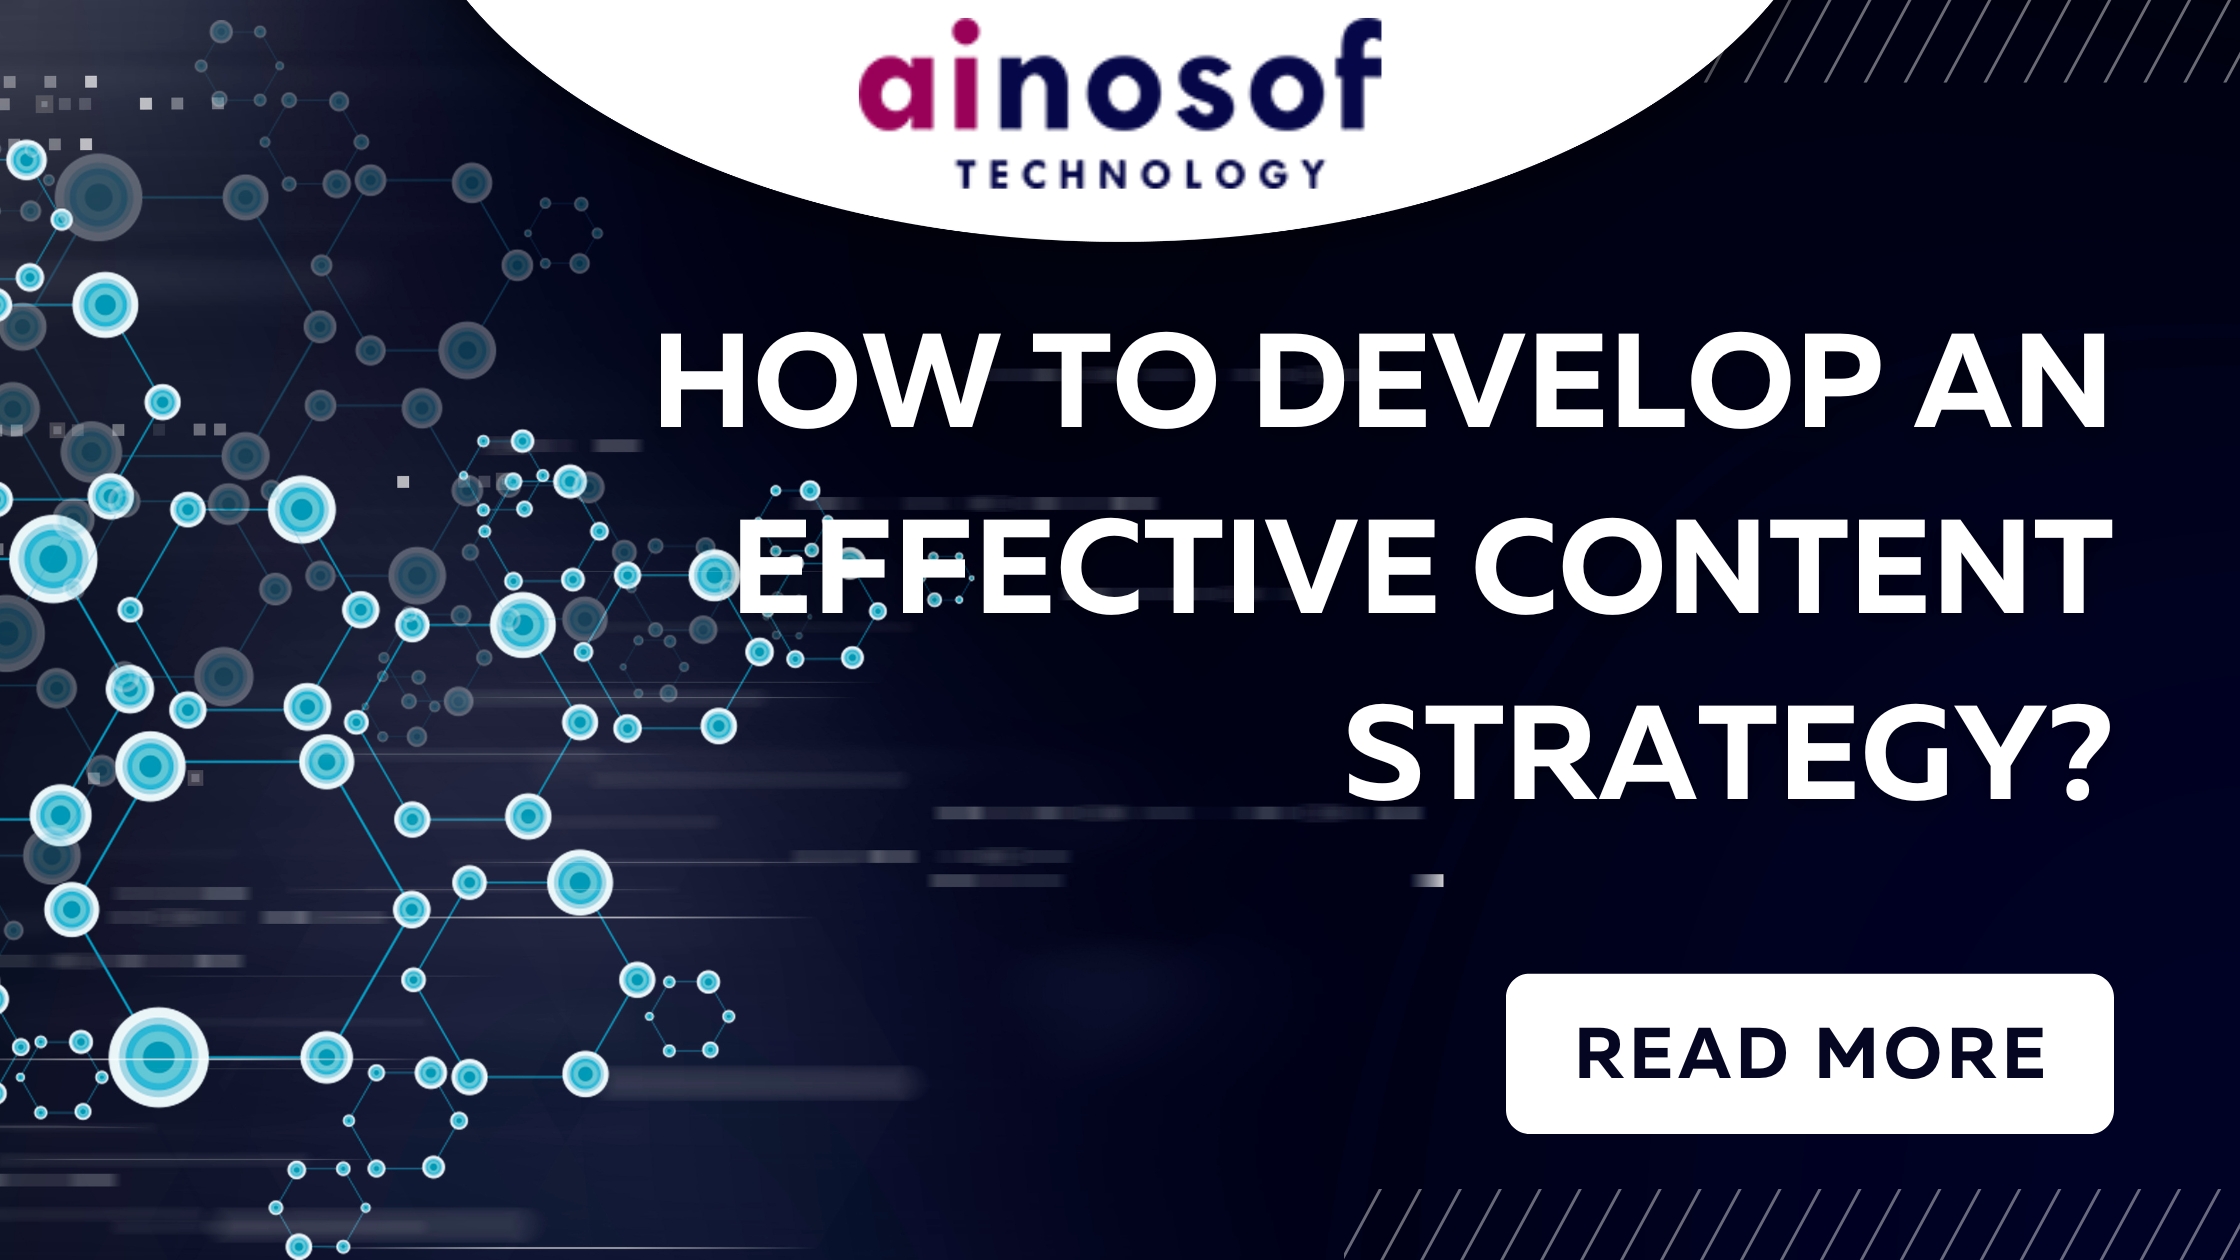 How to Develop an effective Content Strategy- Ainosof Technology